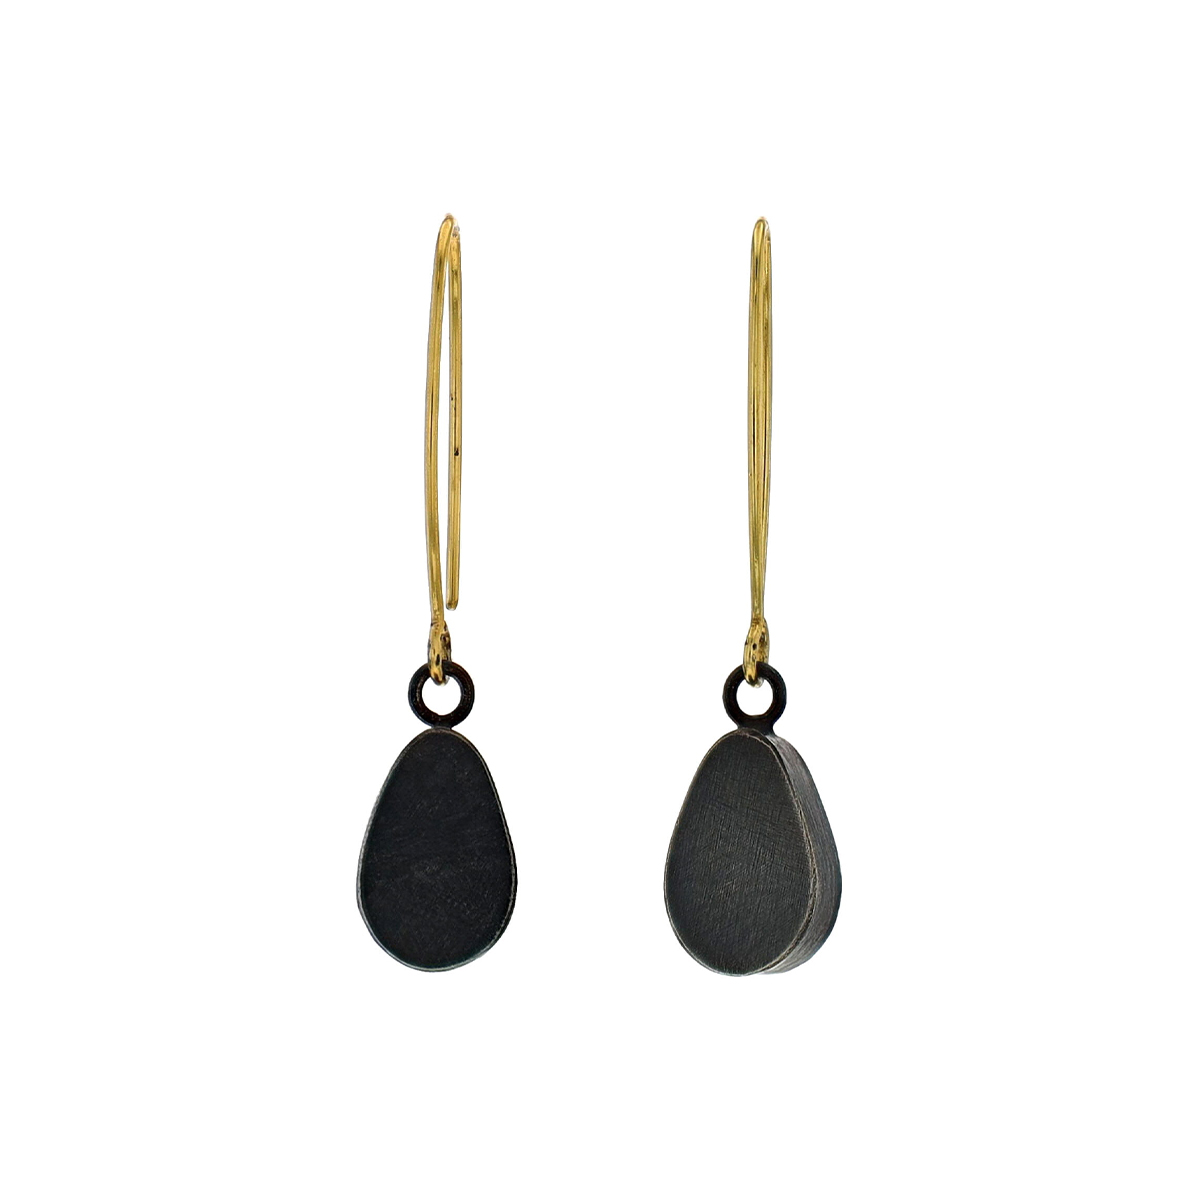 Oxidized and Gold Plated Sterling Silver Teardrop Earrings